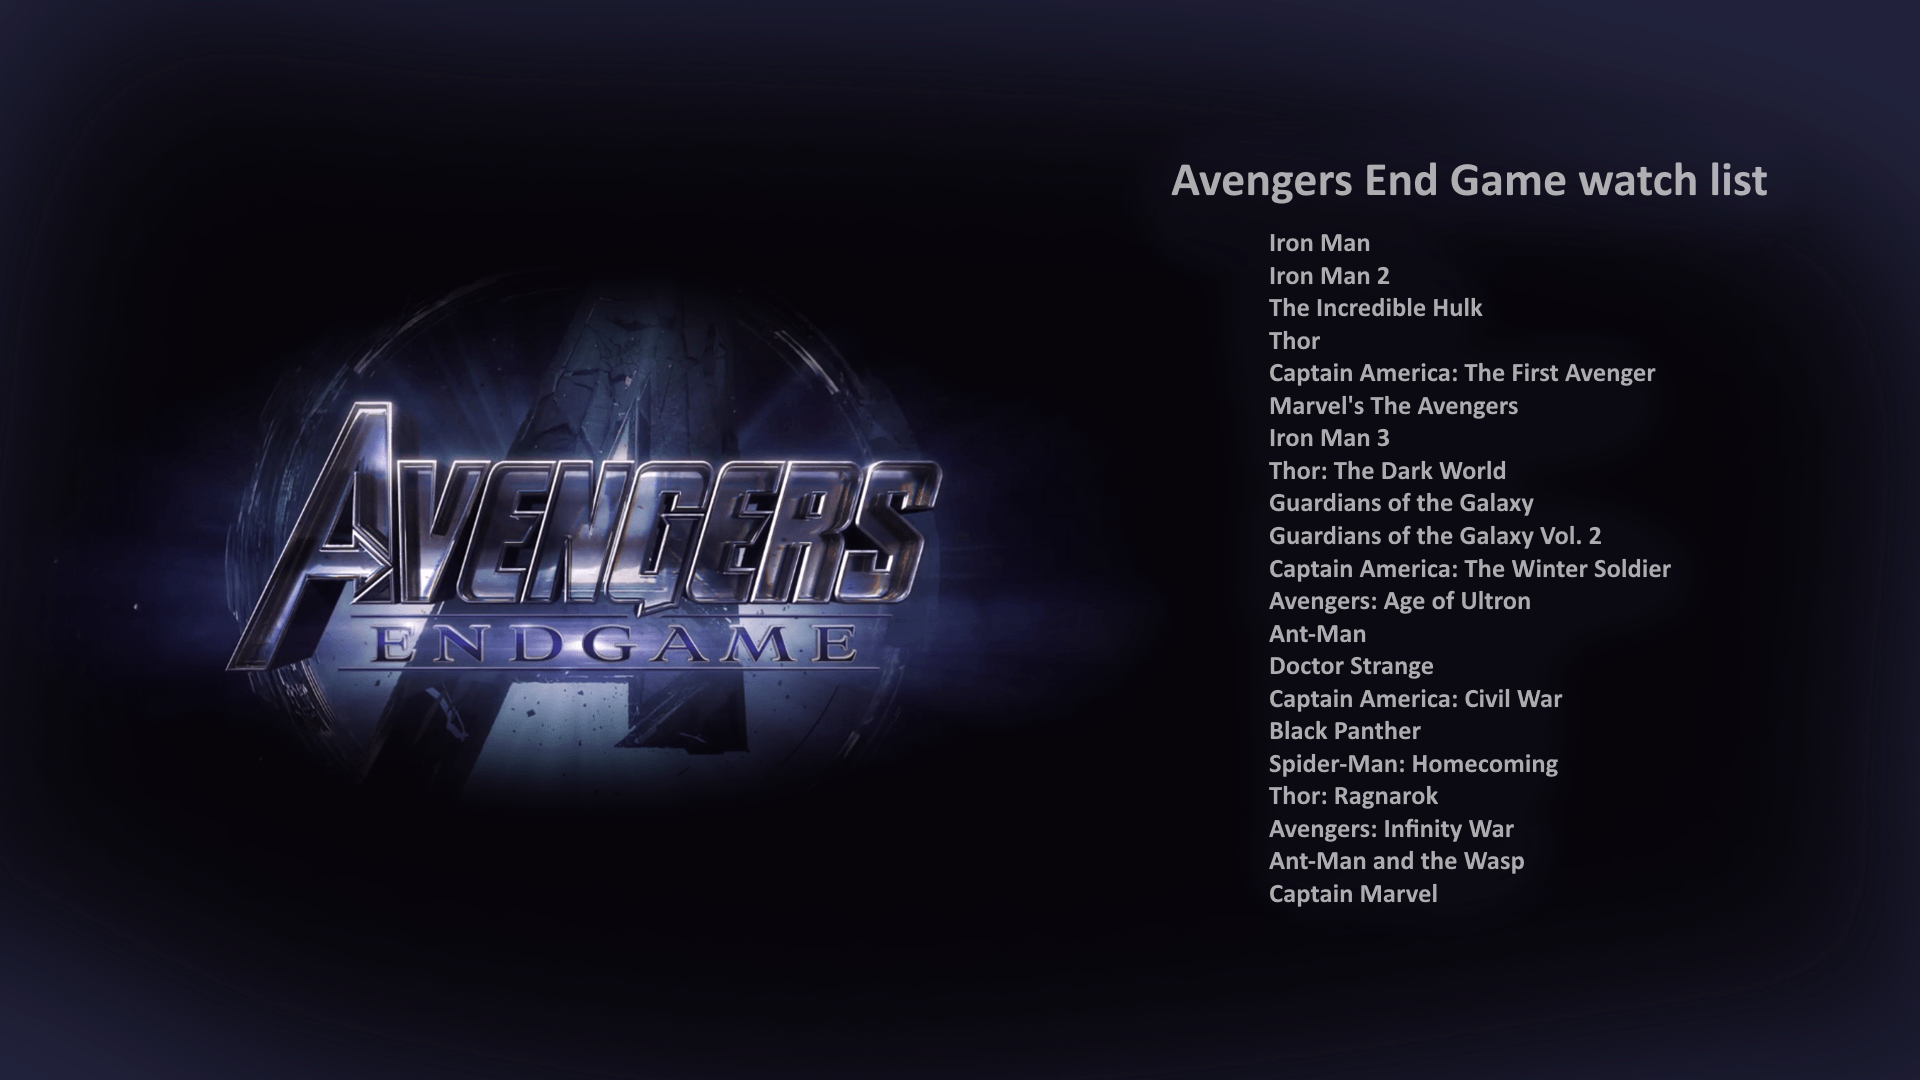 Rewatching all the movies in preparation for endgame. Made this to